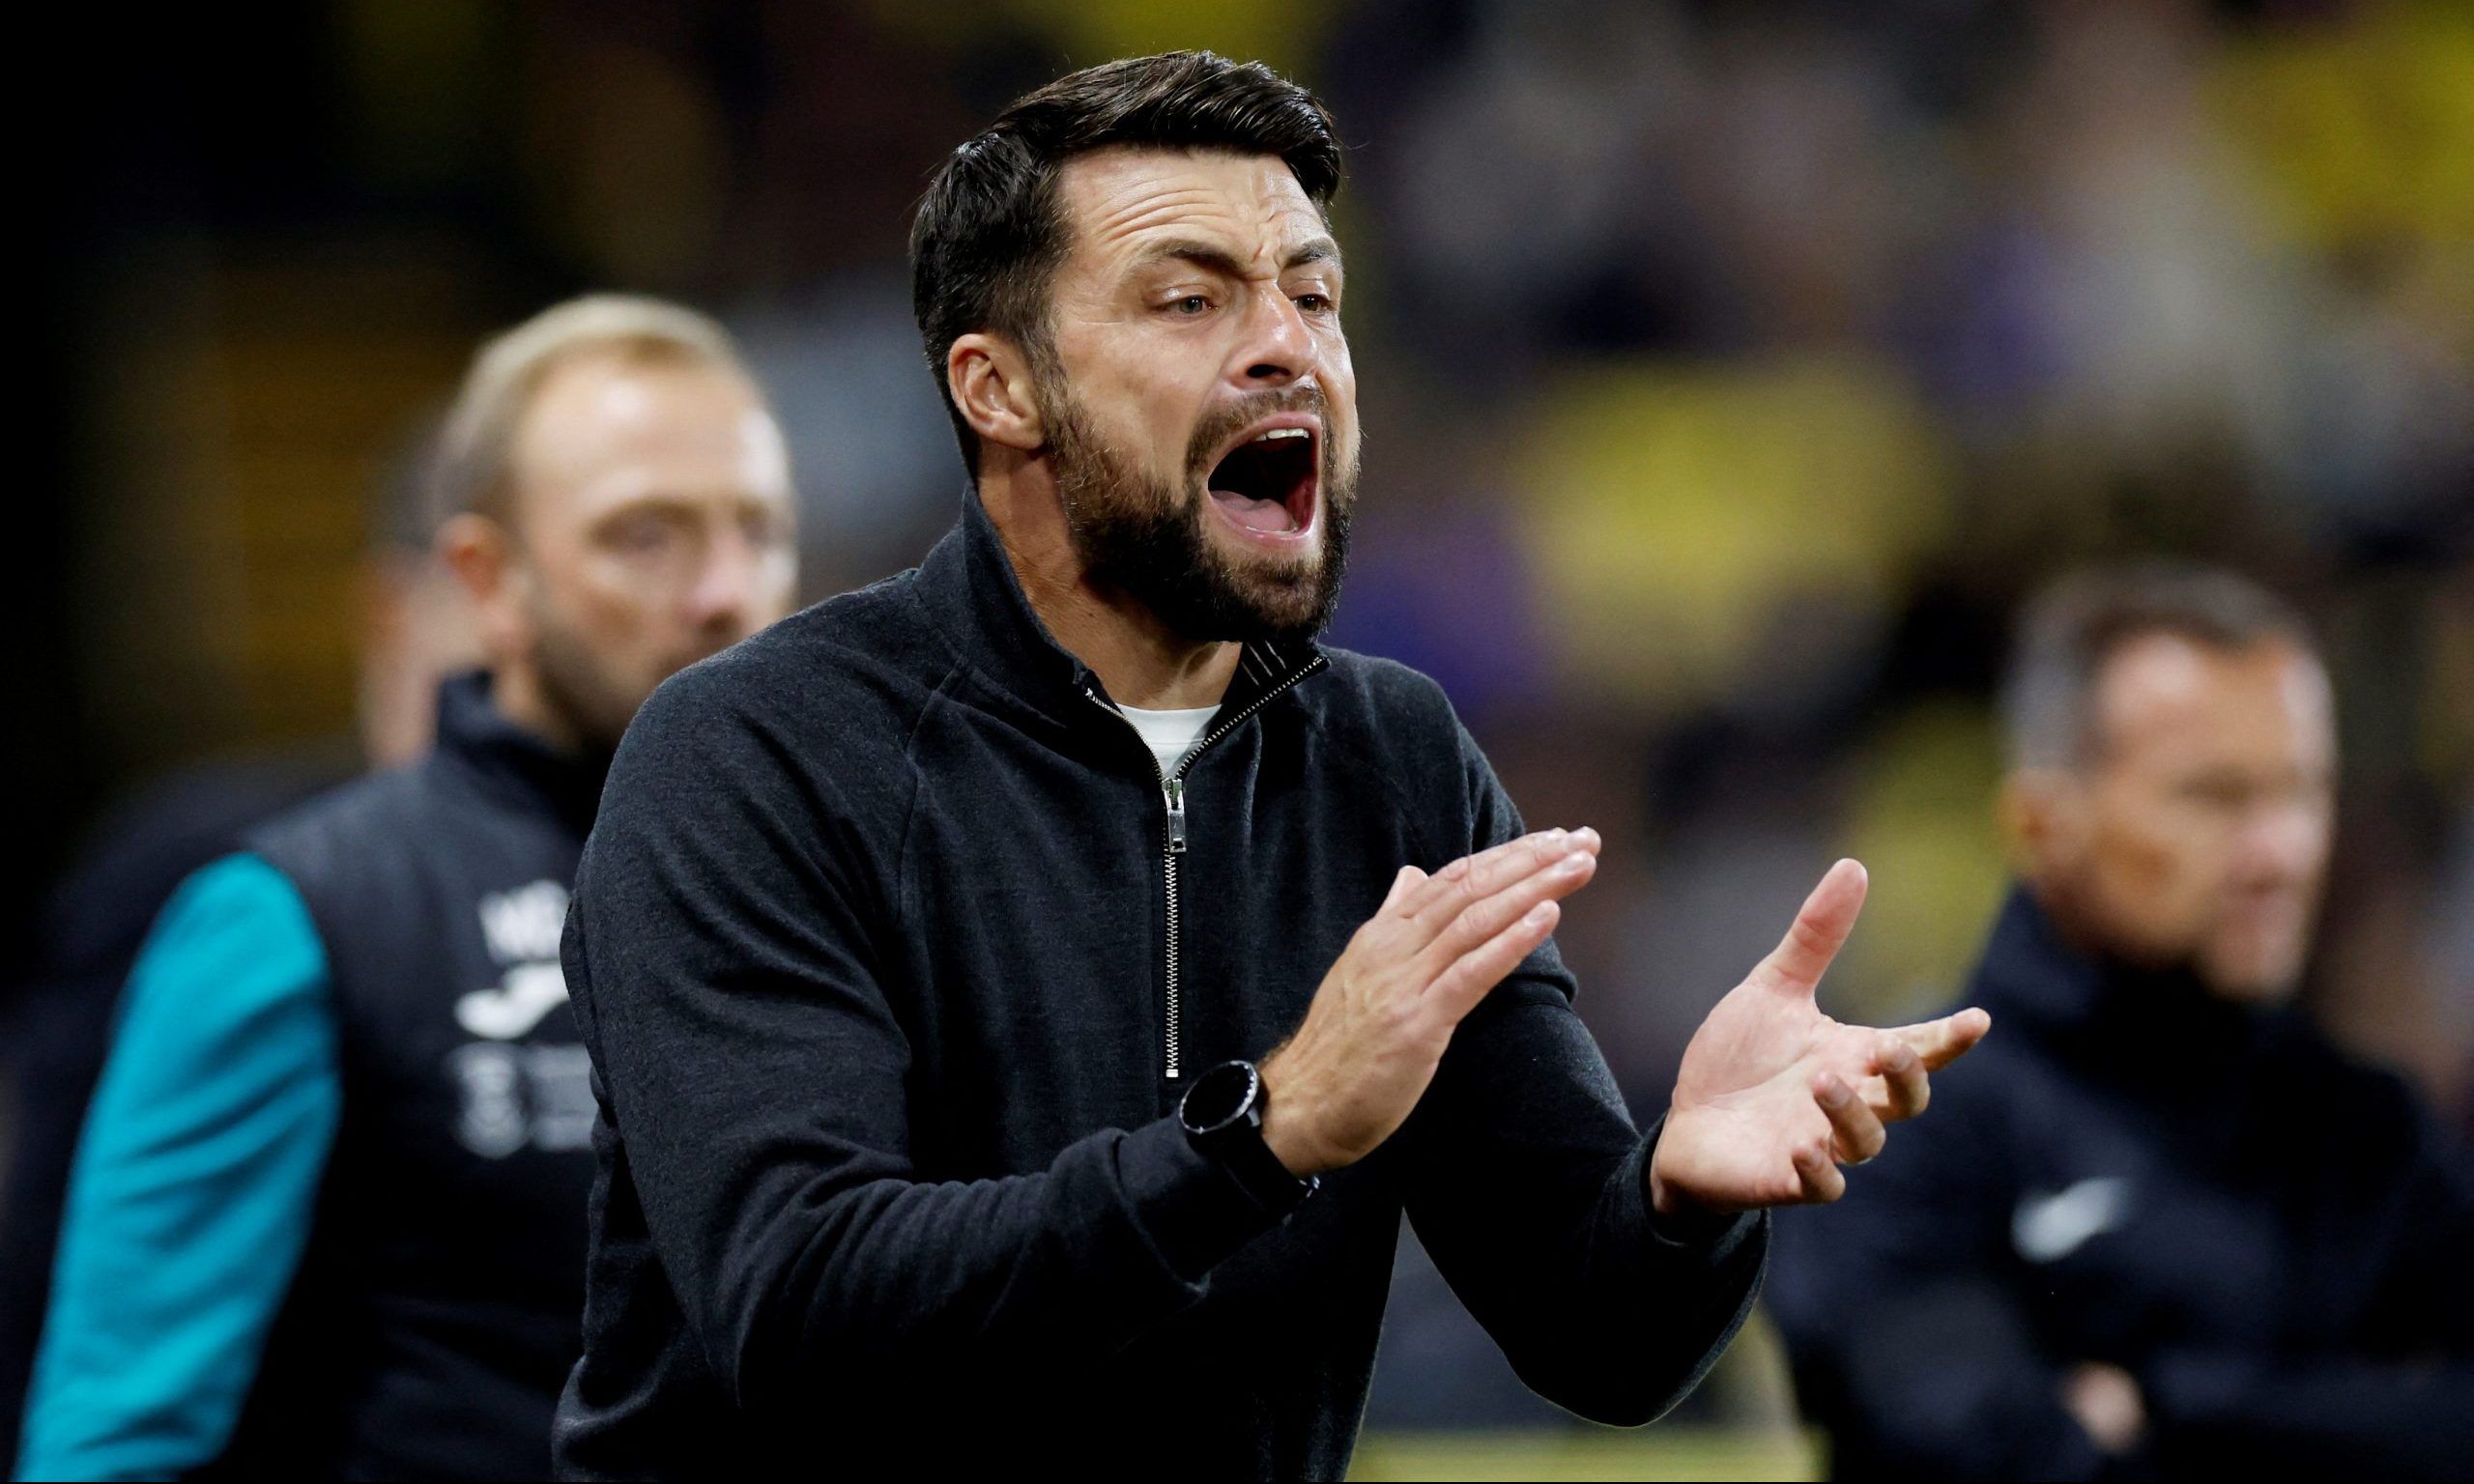 Soccer Football - Championship - Watford v Swansea City - Vicarage Road, Watford, Britain - October 5, 2022 Swansea City manager Russell Martin reacts  Action Images/Peter Cziborra  EDITORIAL USE ONLY. No use with unauthorized audio, video, data, fixture lists, club/league logos or 